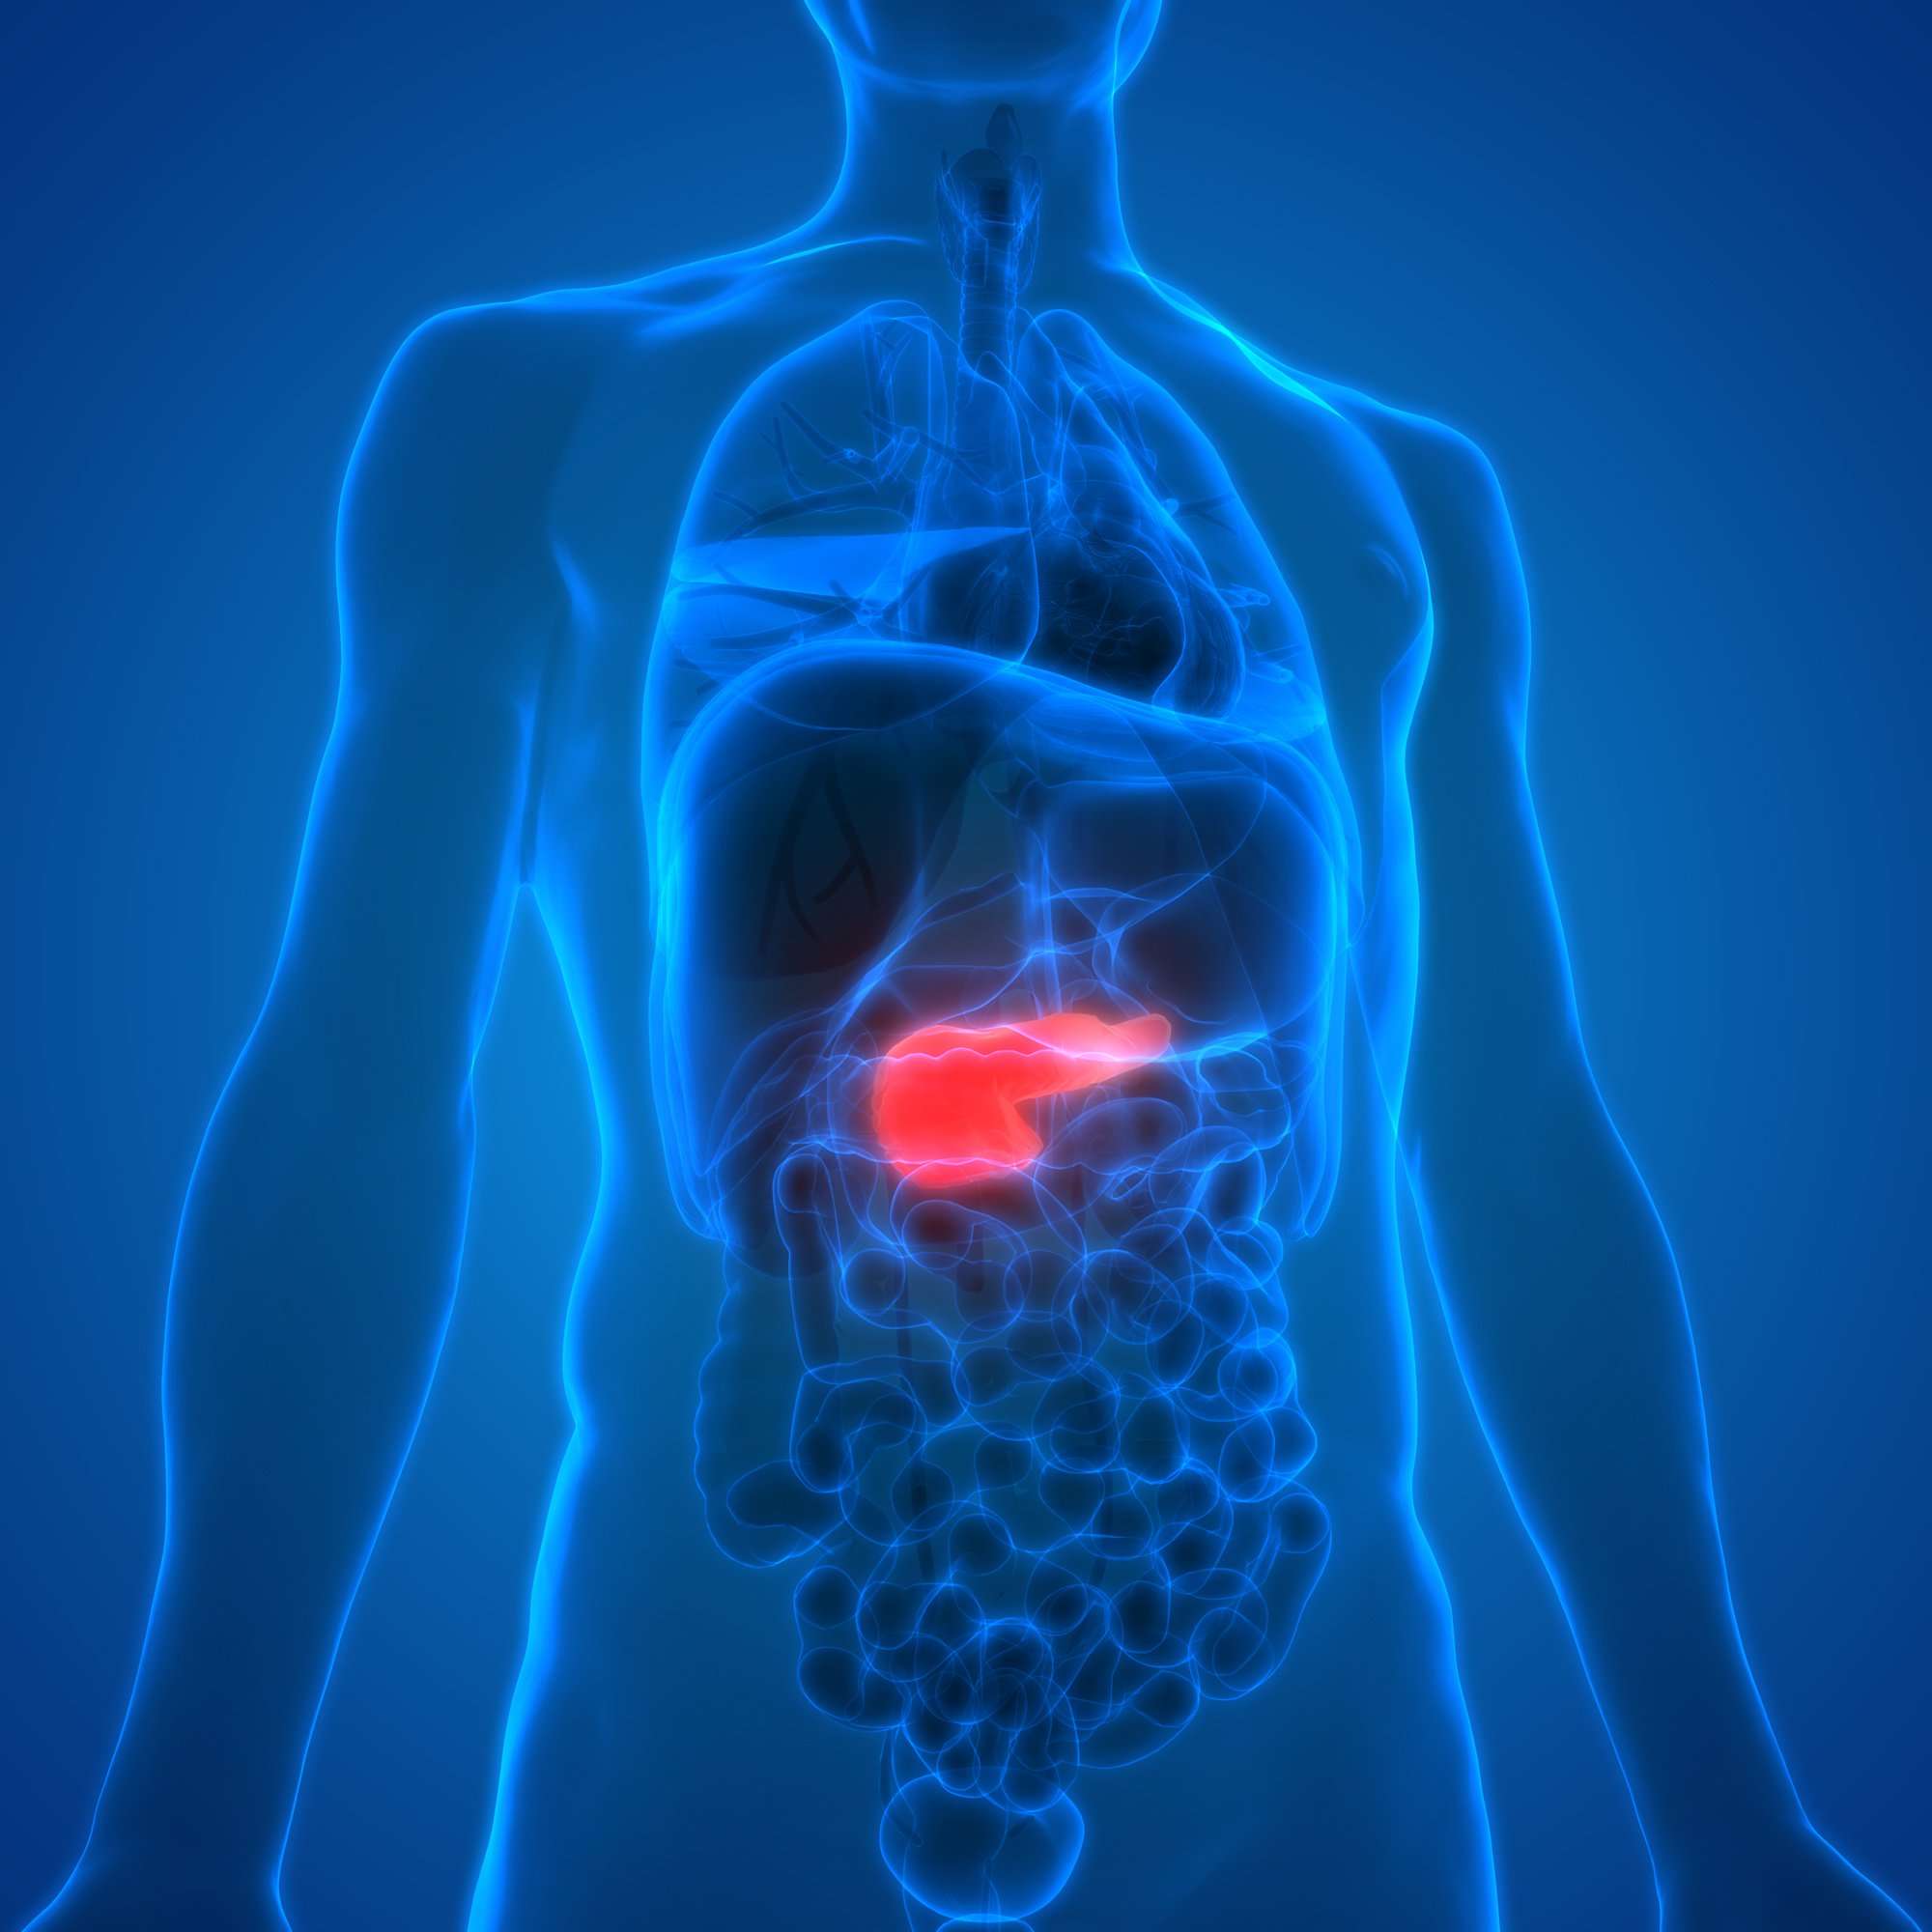 10 Things You Need to Know About Pancreatic Cancer